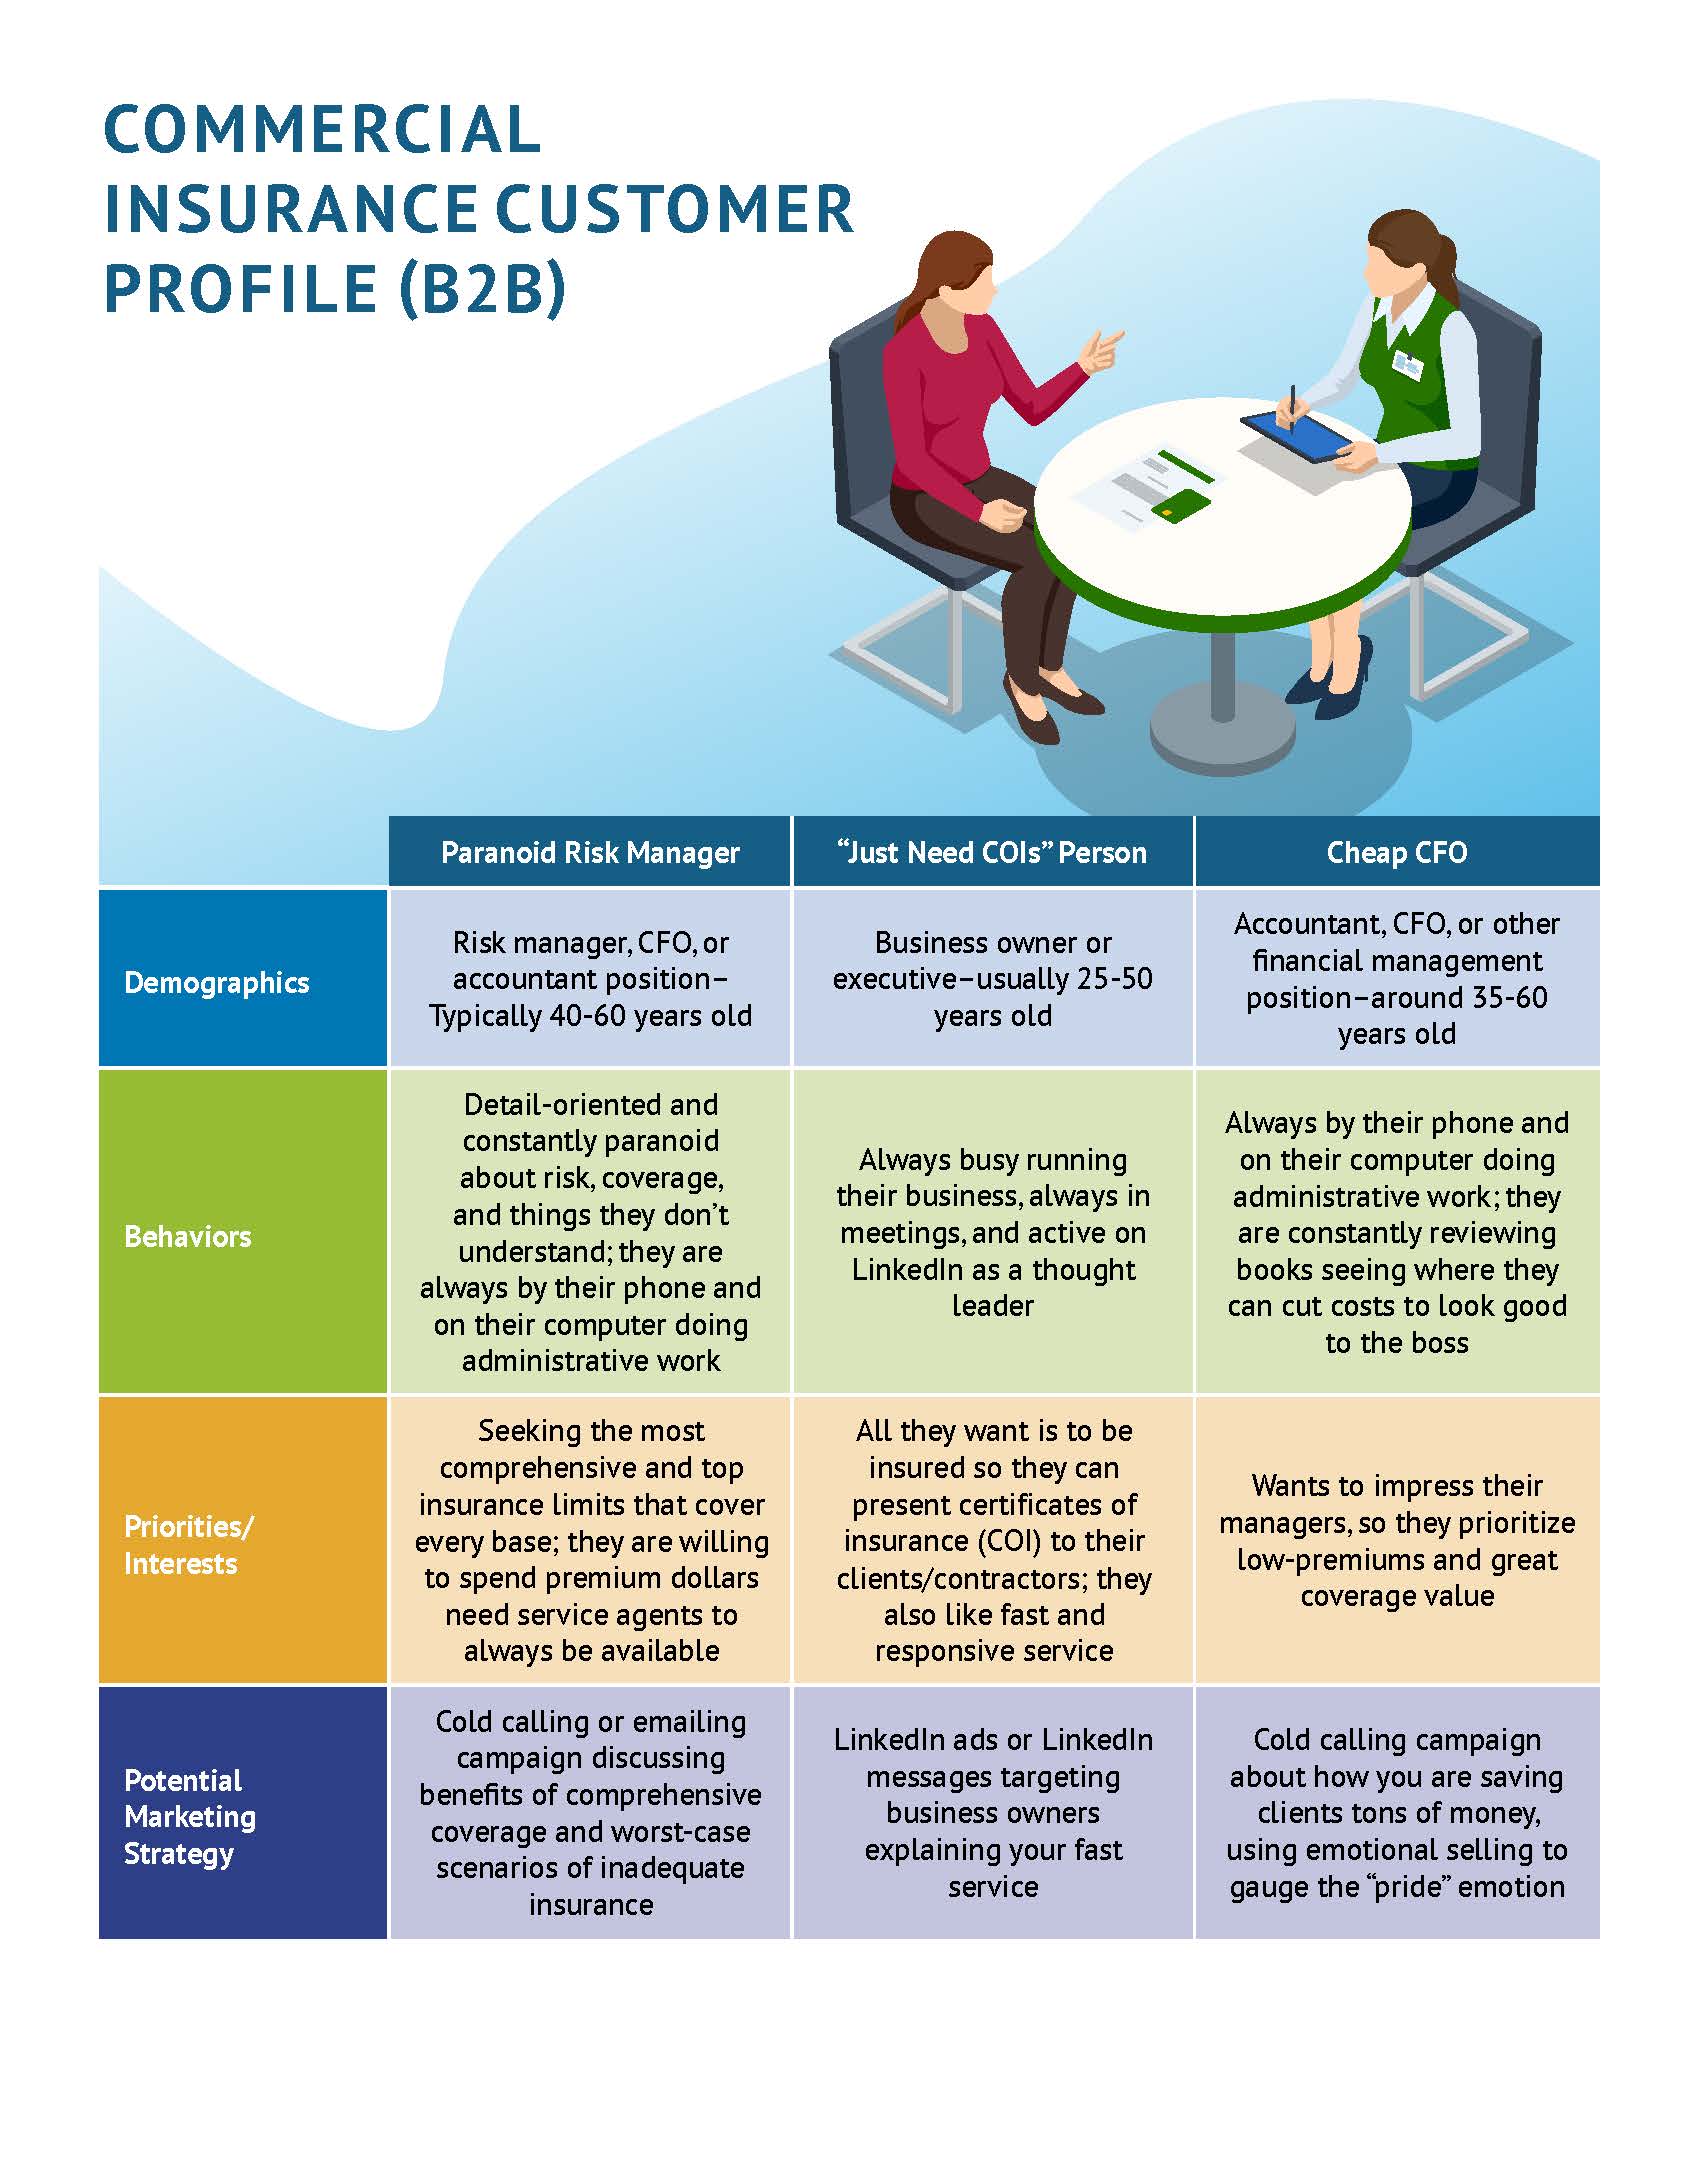 A customer profile chart for a Commercial Insurance Customer for a B2B company.